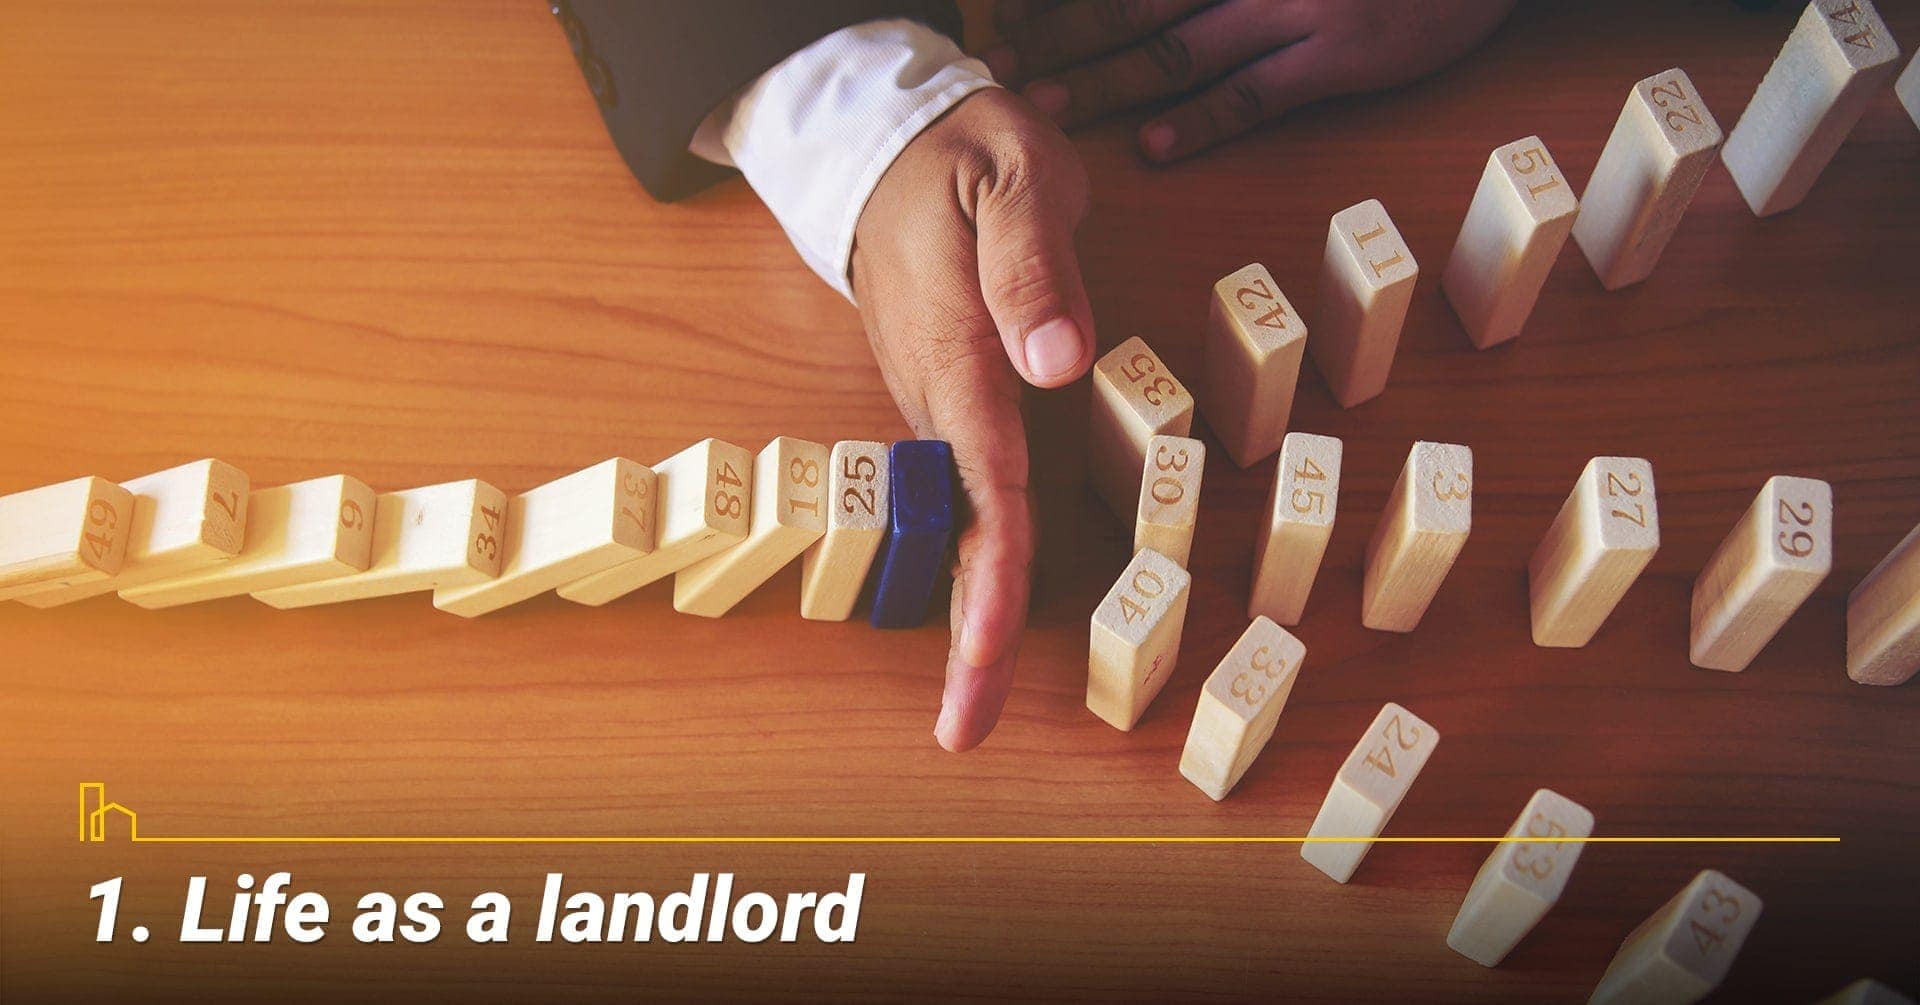 Life as a landlord, protect your rental property